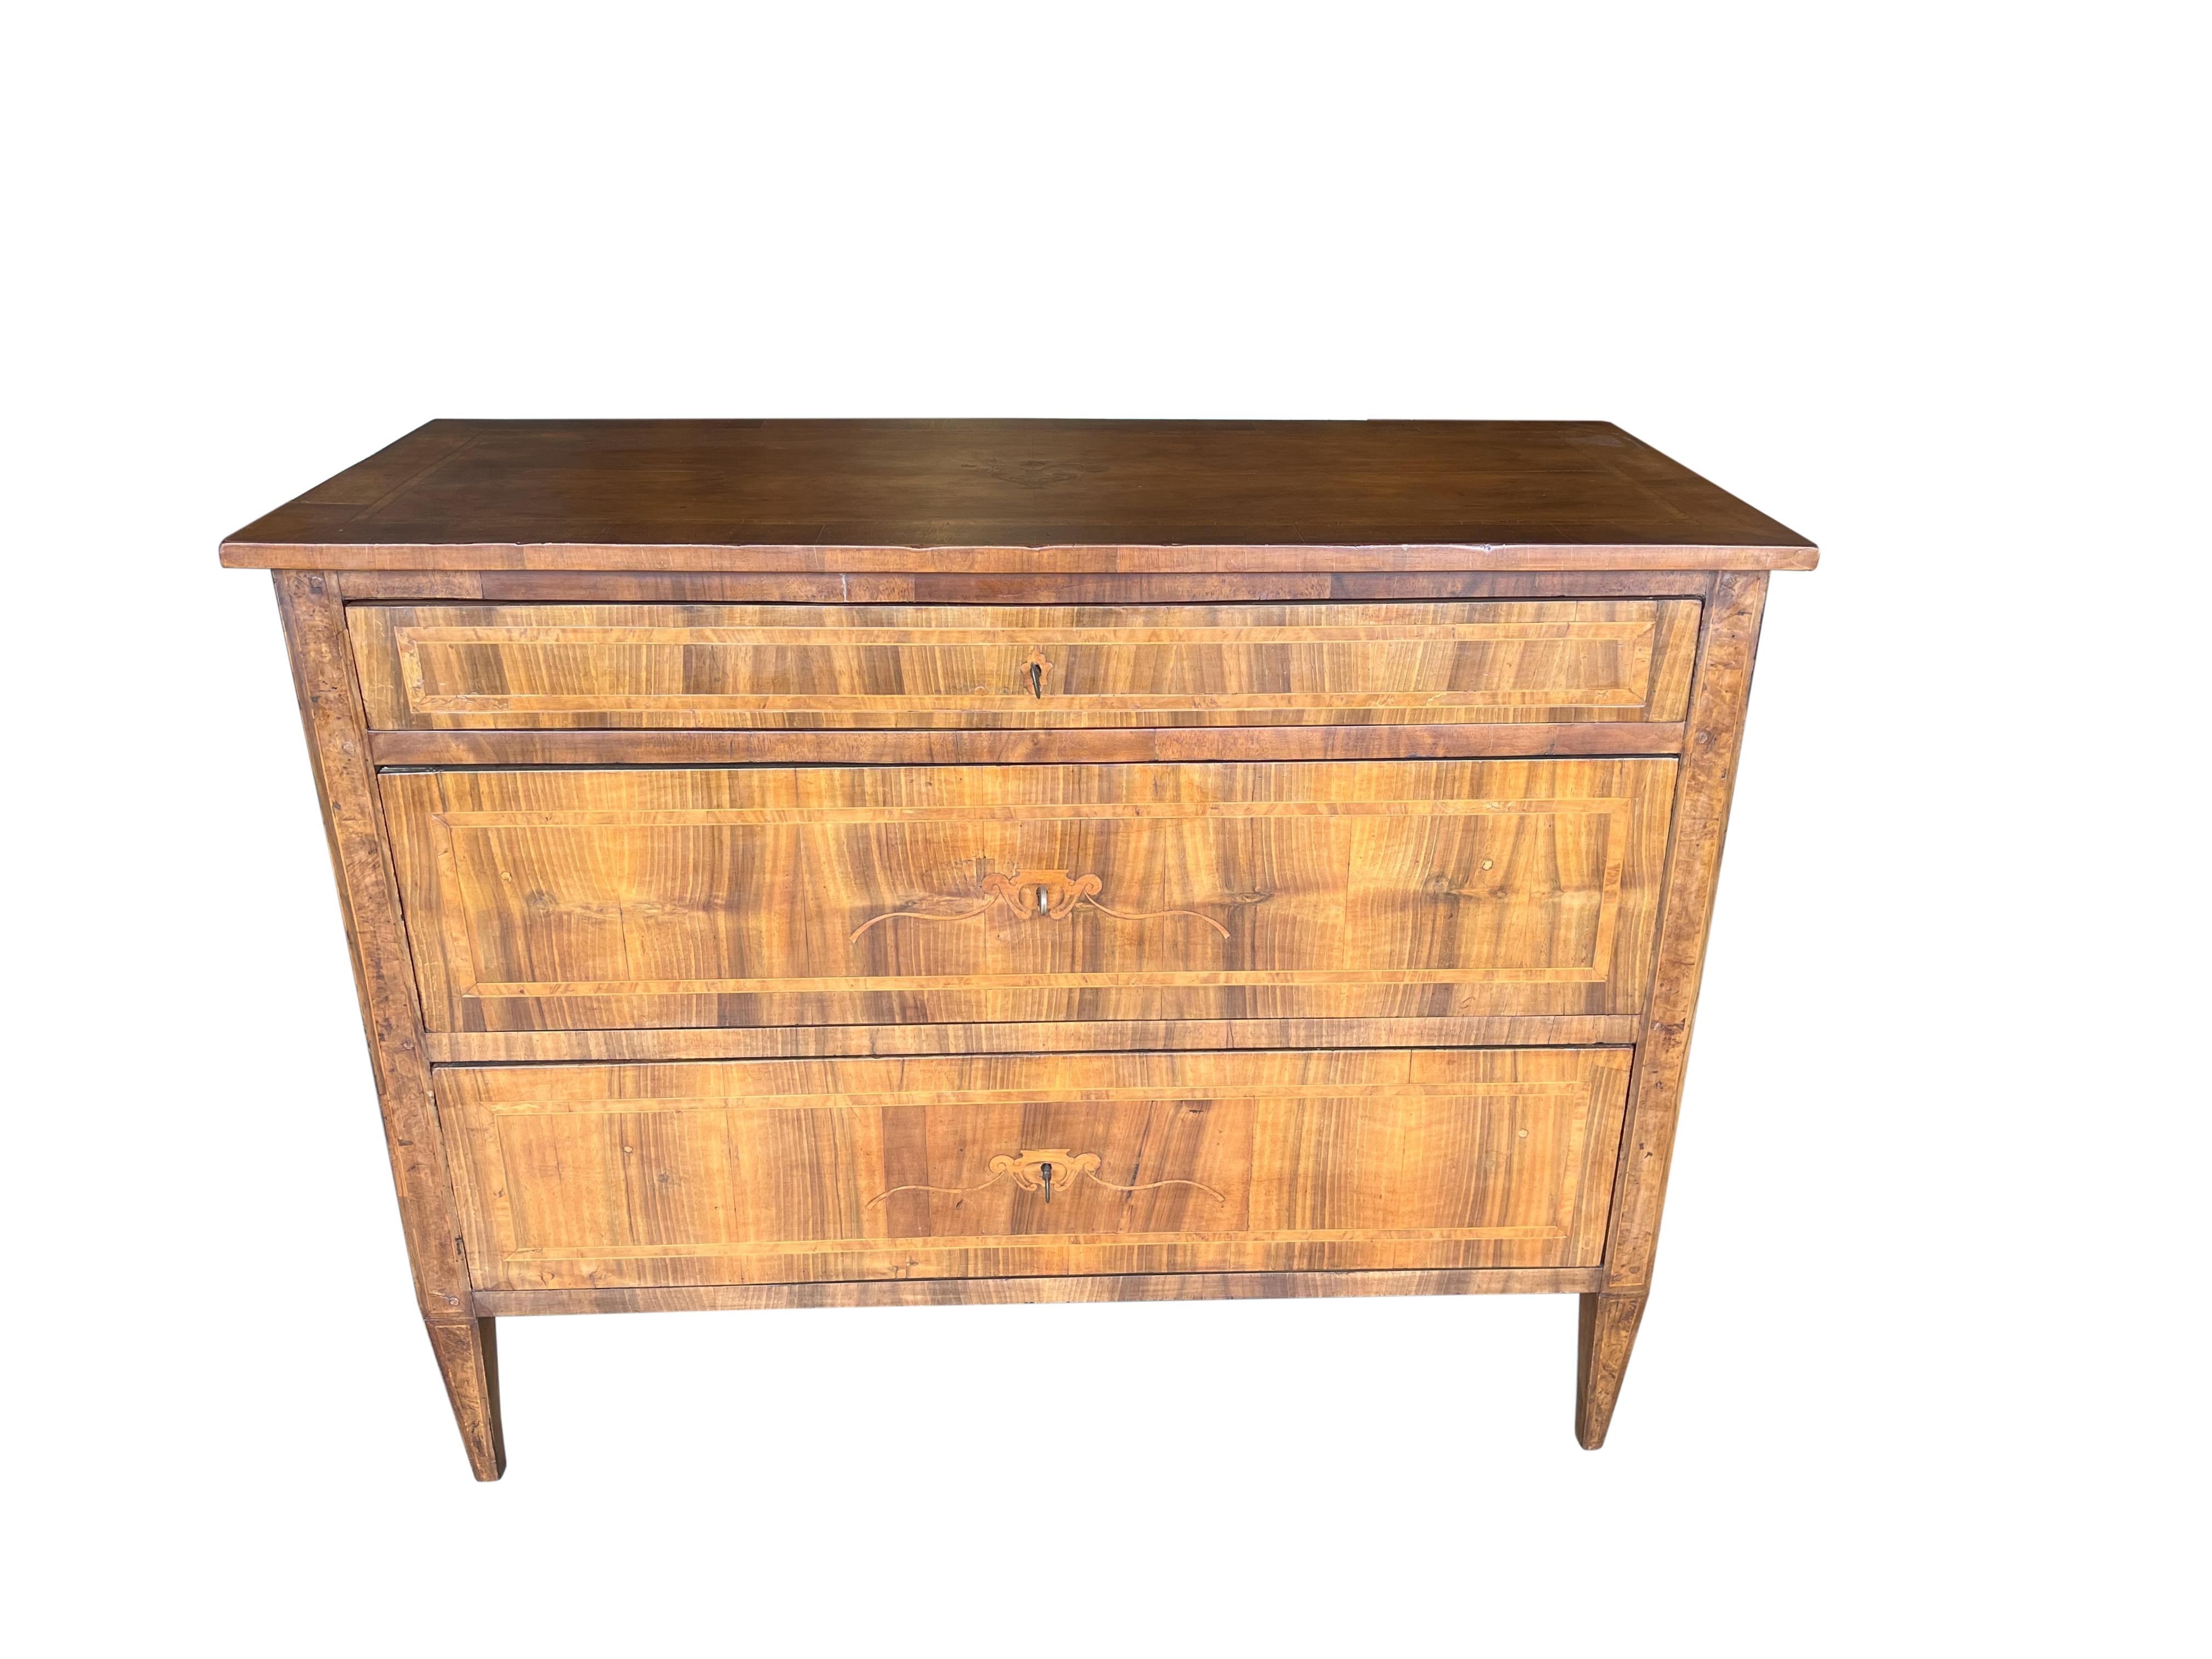 Louis XVI Style Italian Walnut Burl Inlay Locking Chest of Drawers, Tuscany 1890 In Good Condition For Sale In Encinitas, CA